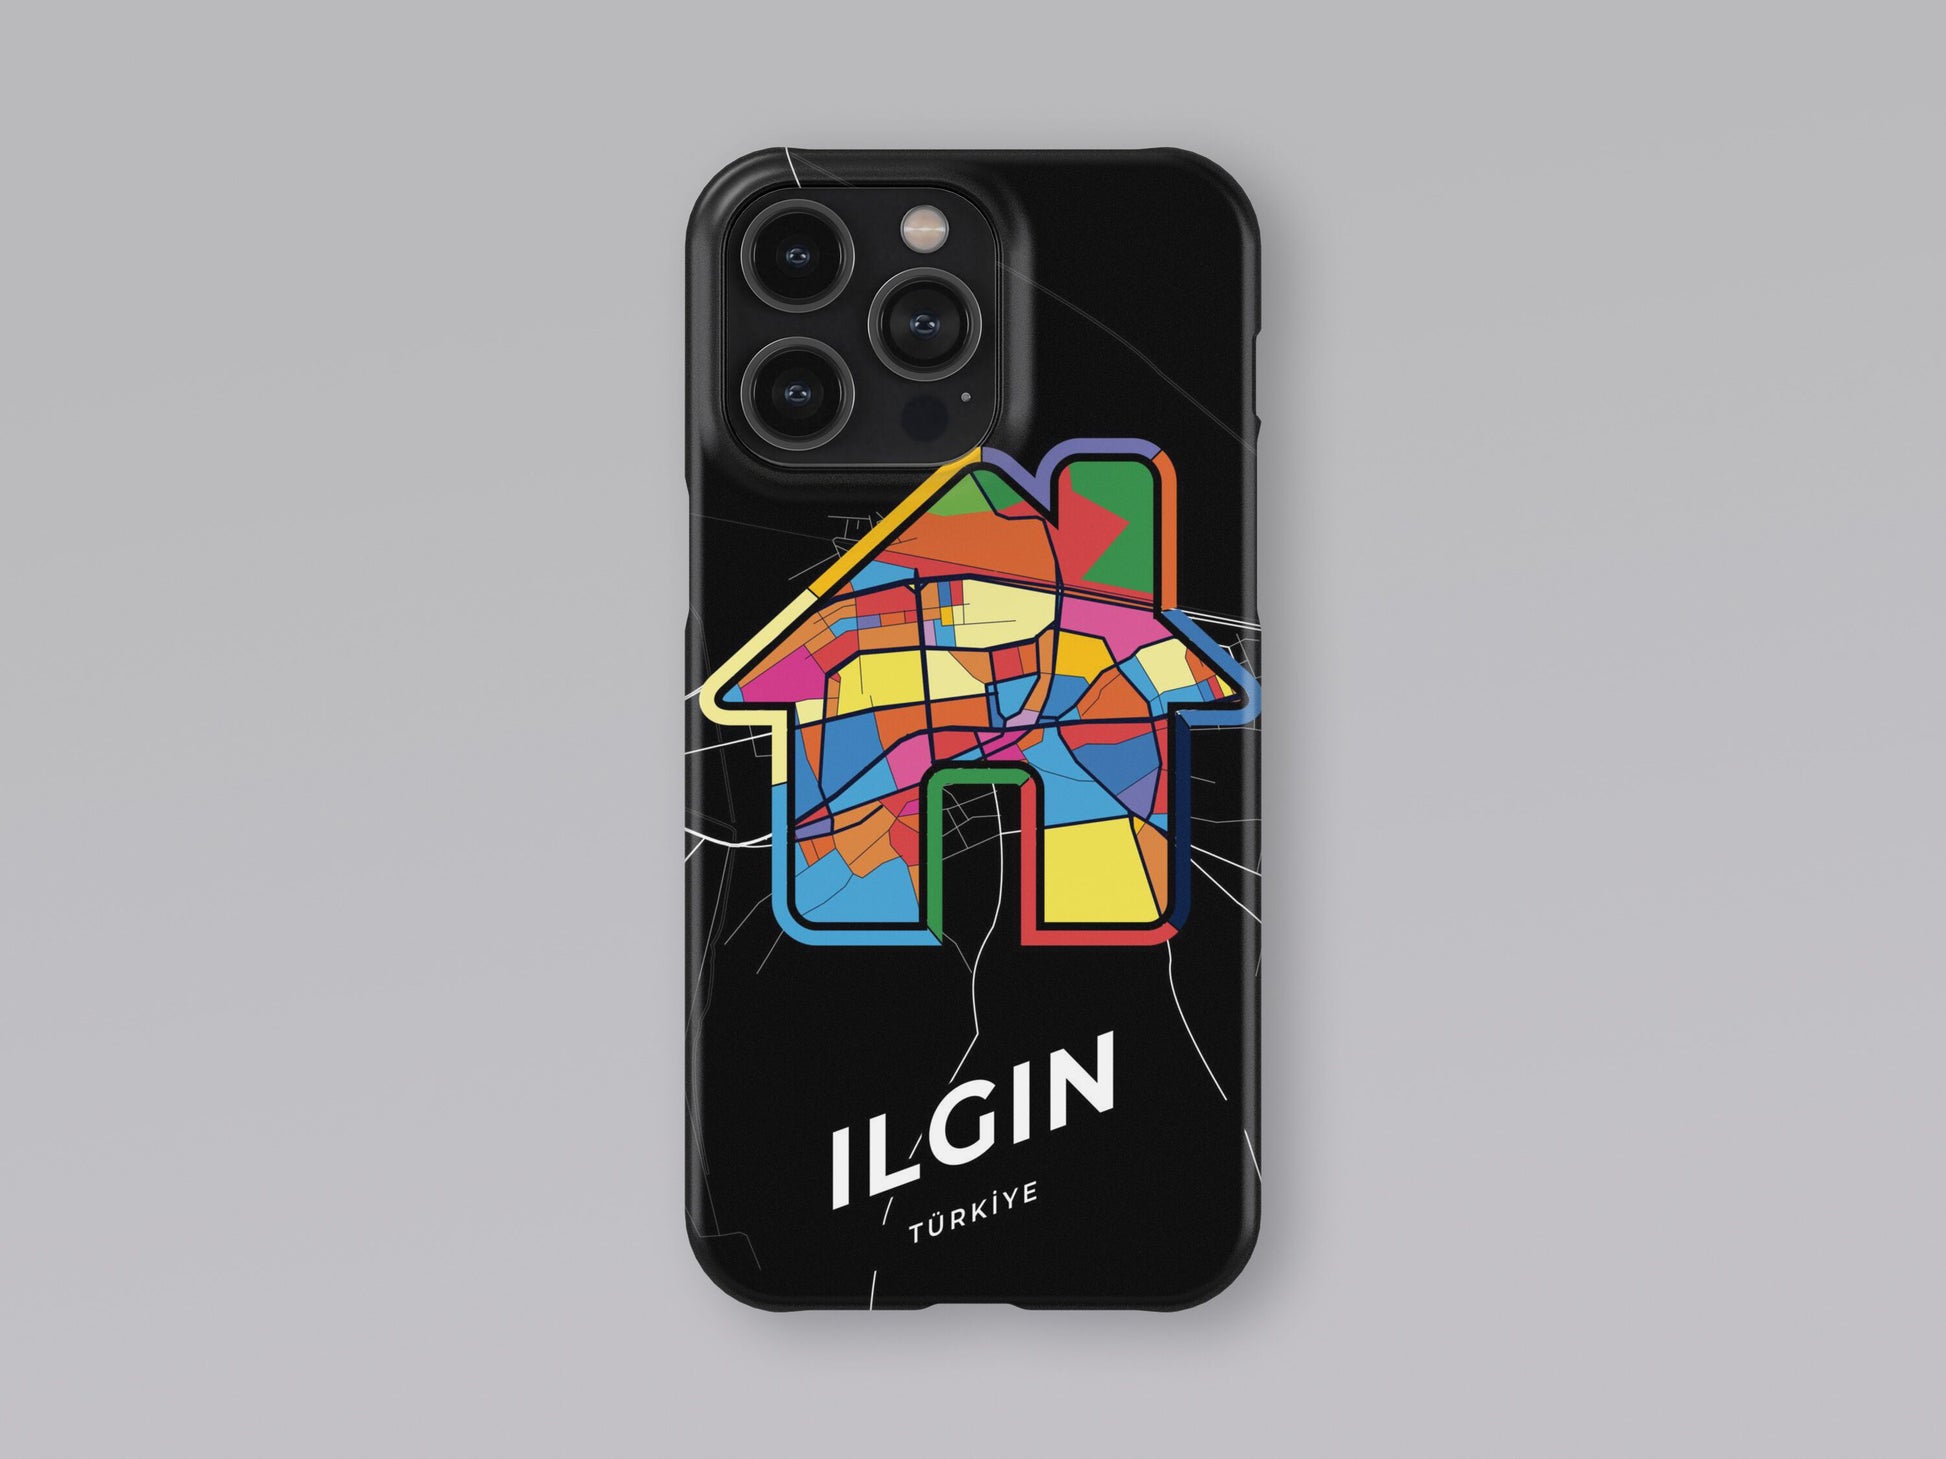 Ilgın Turkey slim phone case with colorful icon. Birthday, wedding or housewarming gift. Couple match cases. 3